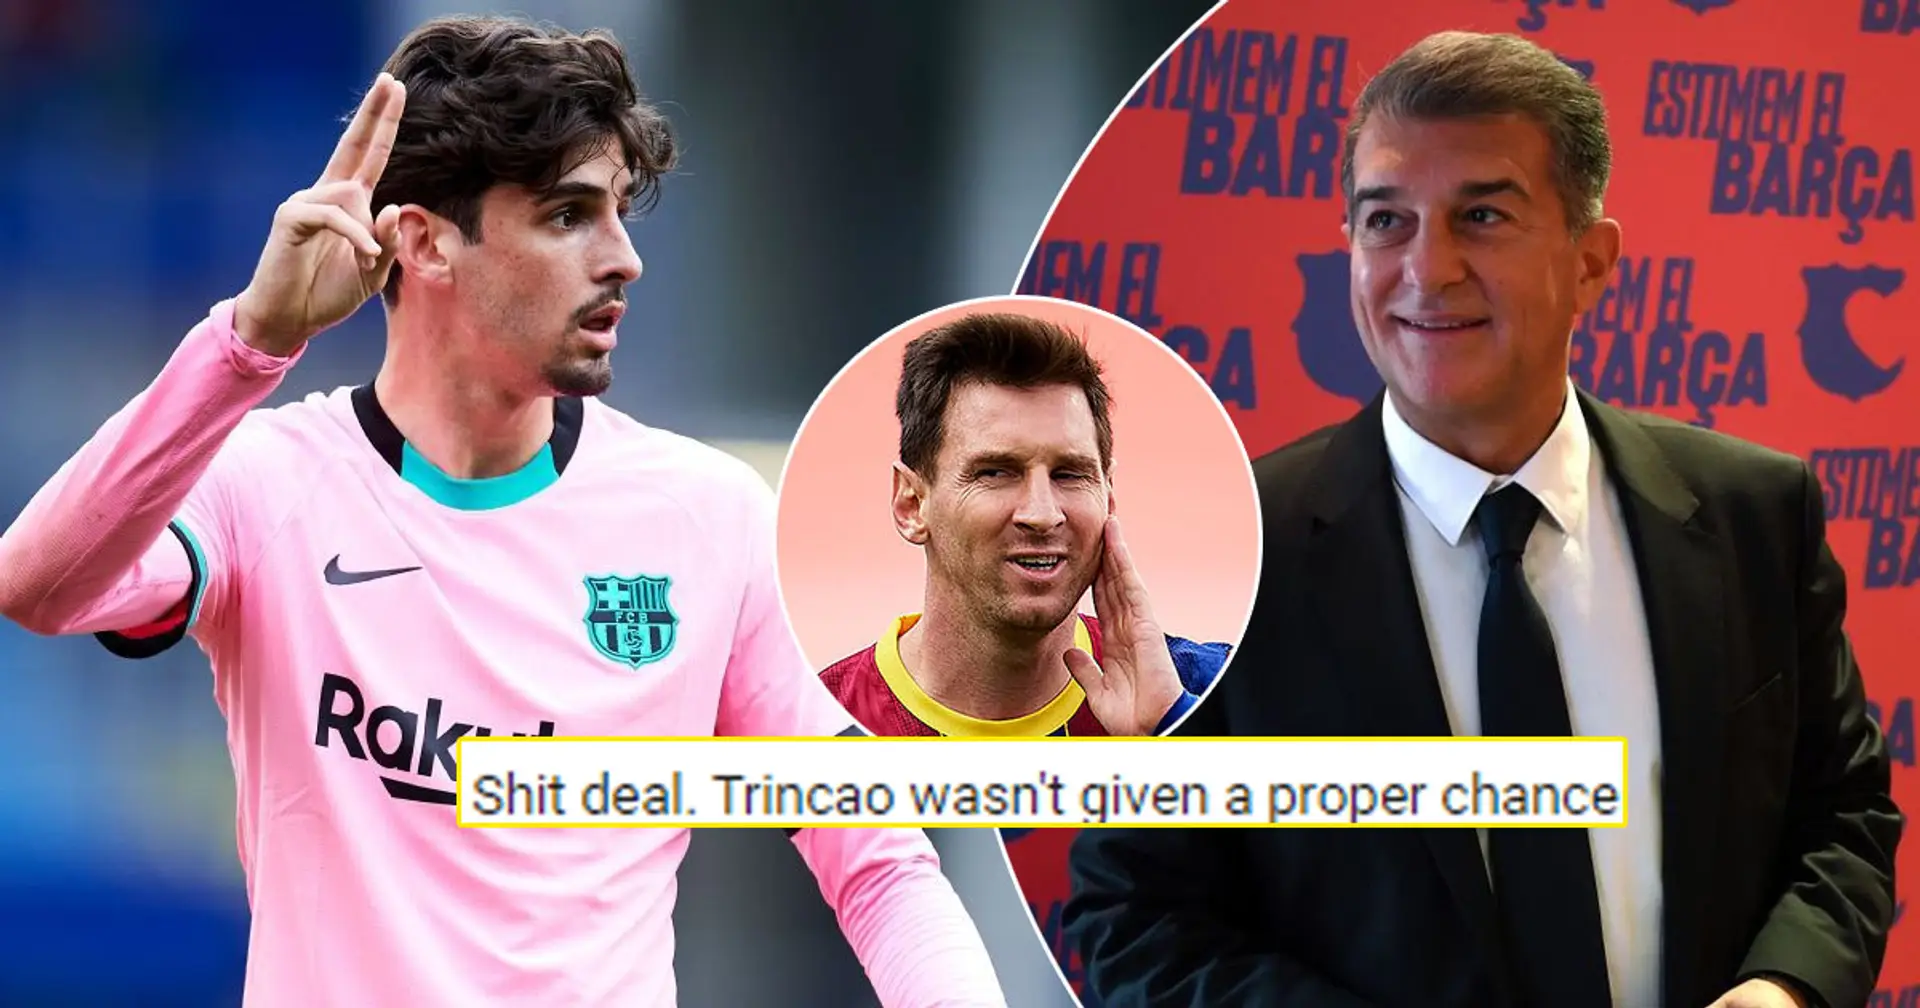 'Laporta shipping young players for Messi's wages', 'Perfect deal': Blaugrana community divided over Trincao loan